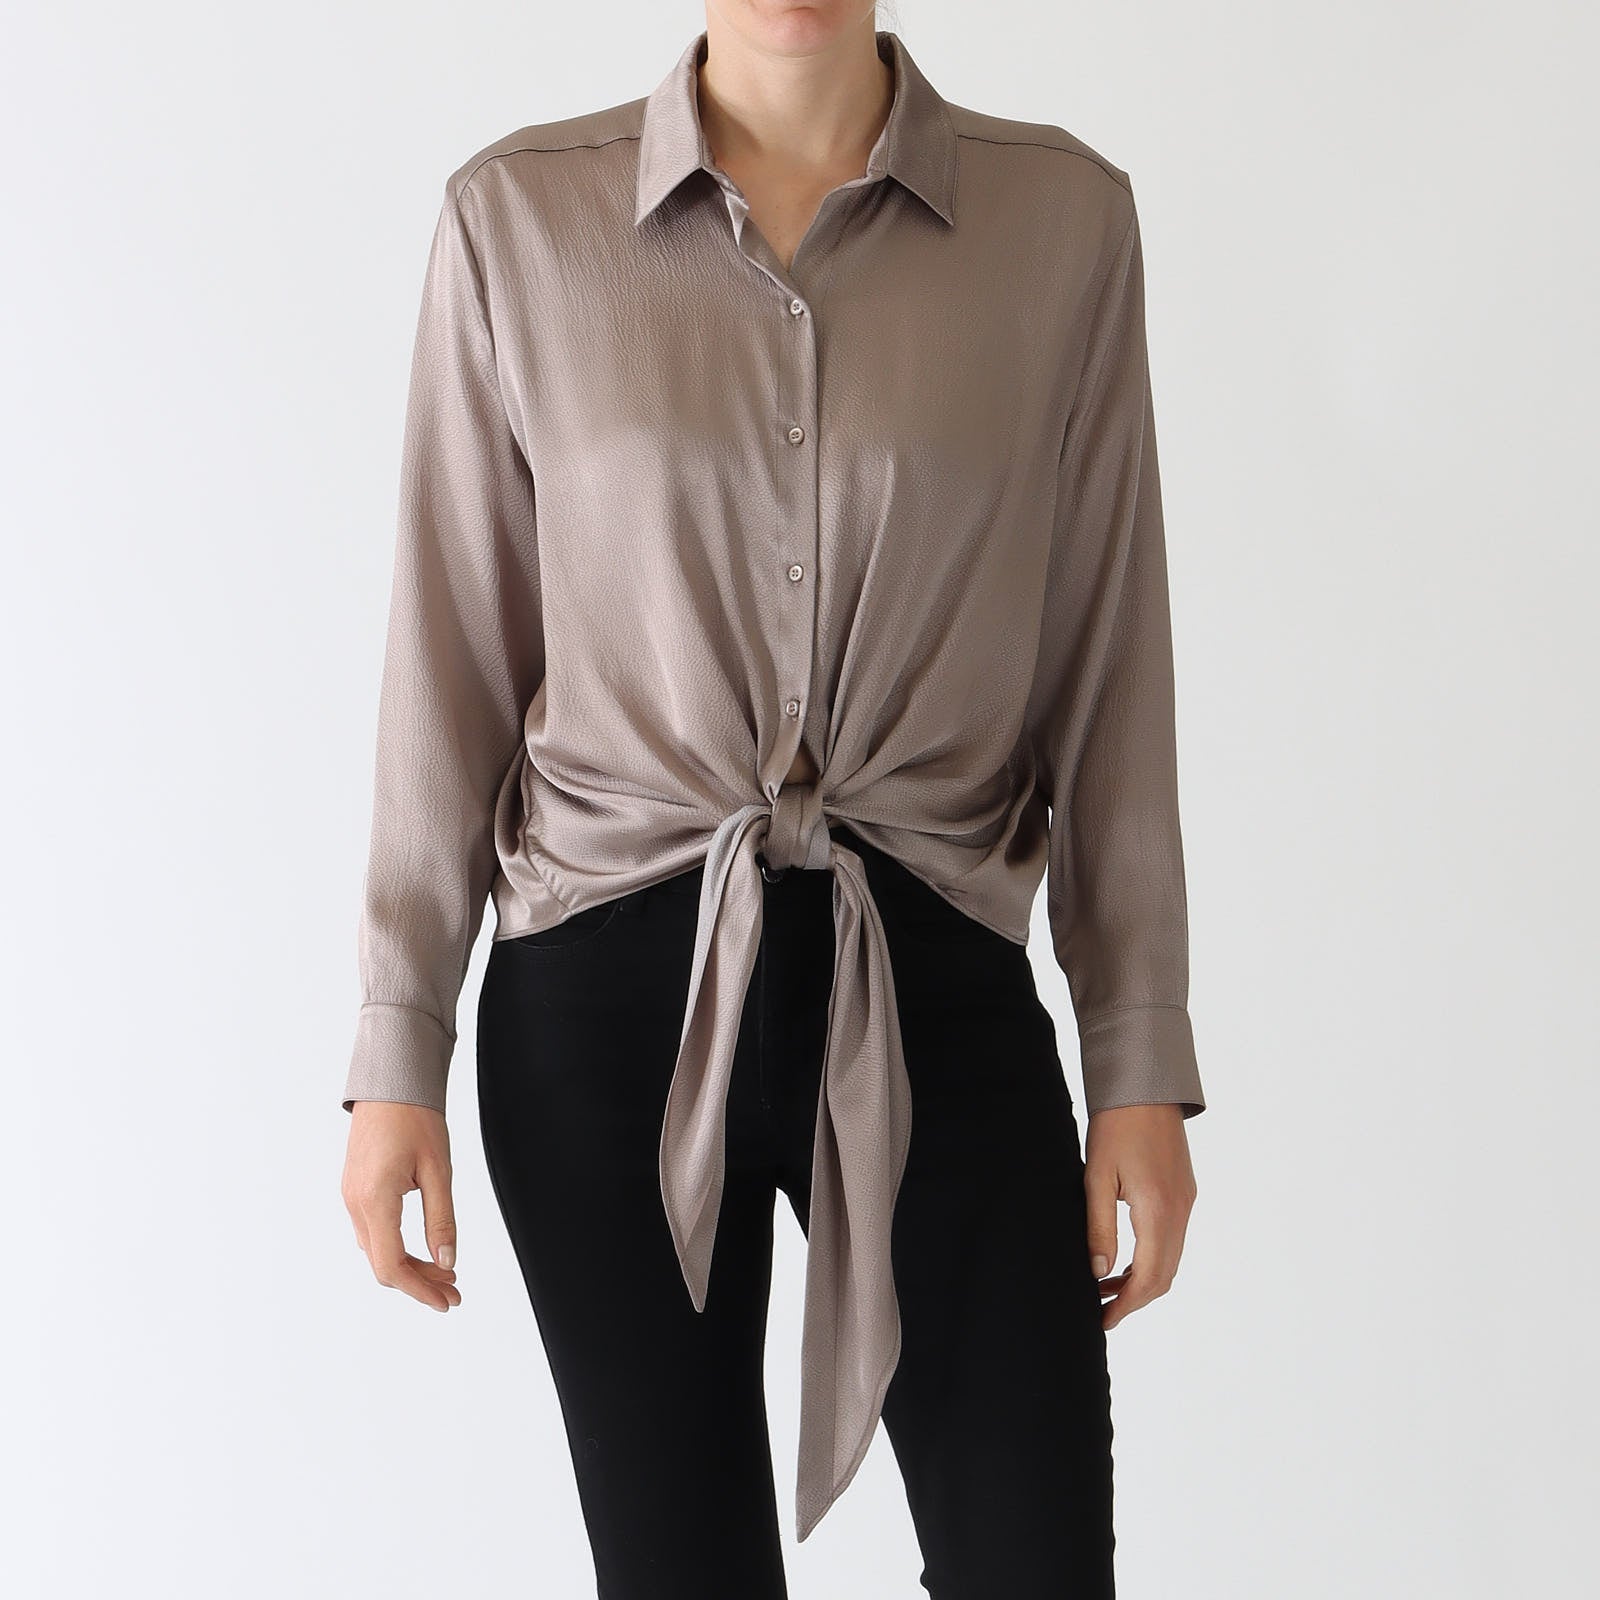 Middle Grey Tie Knot Blouse